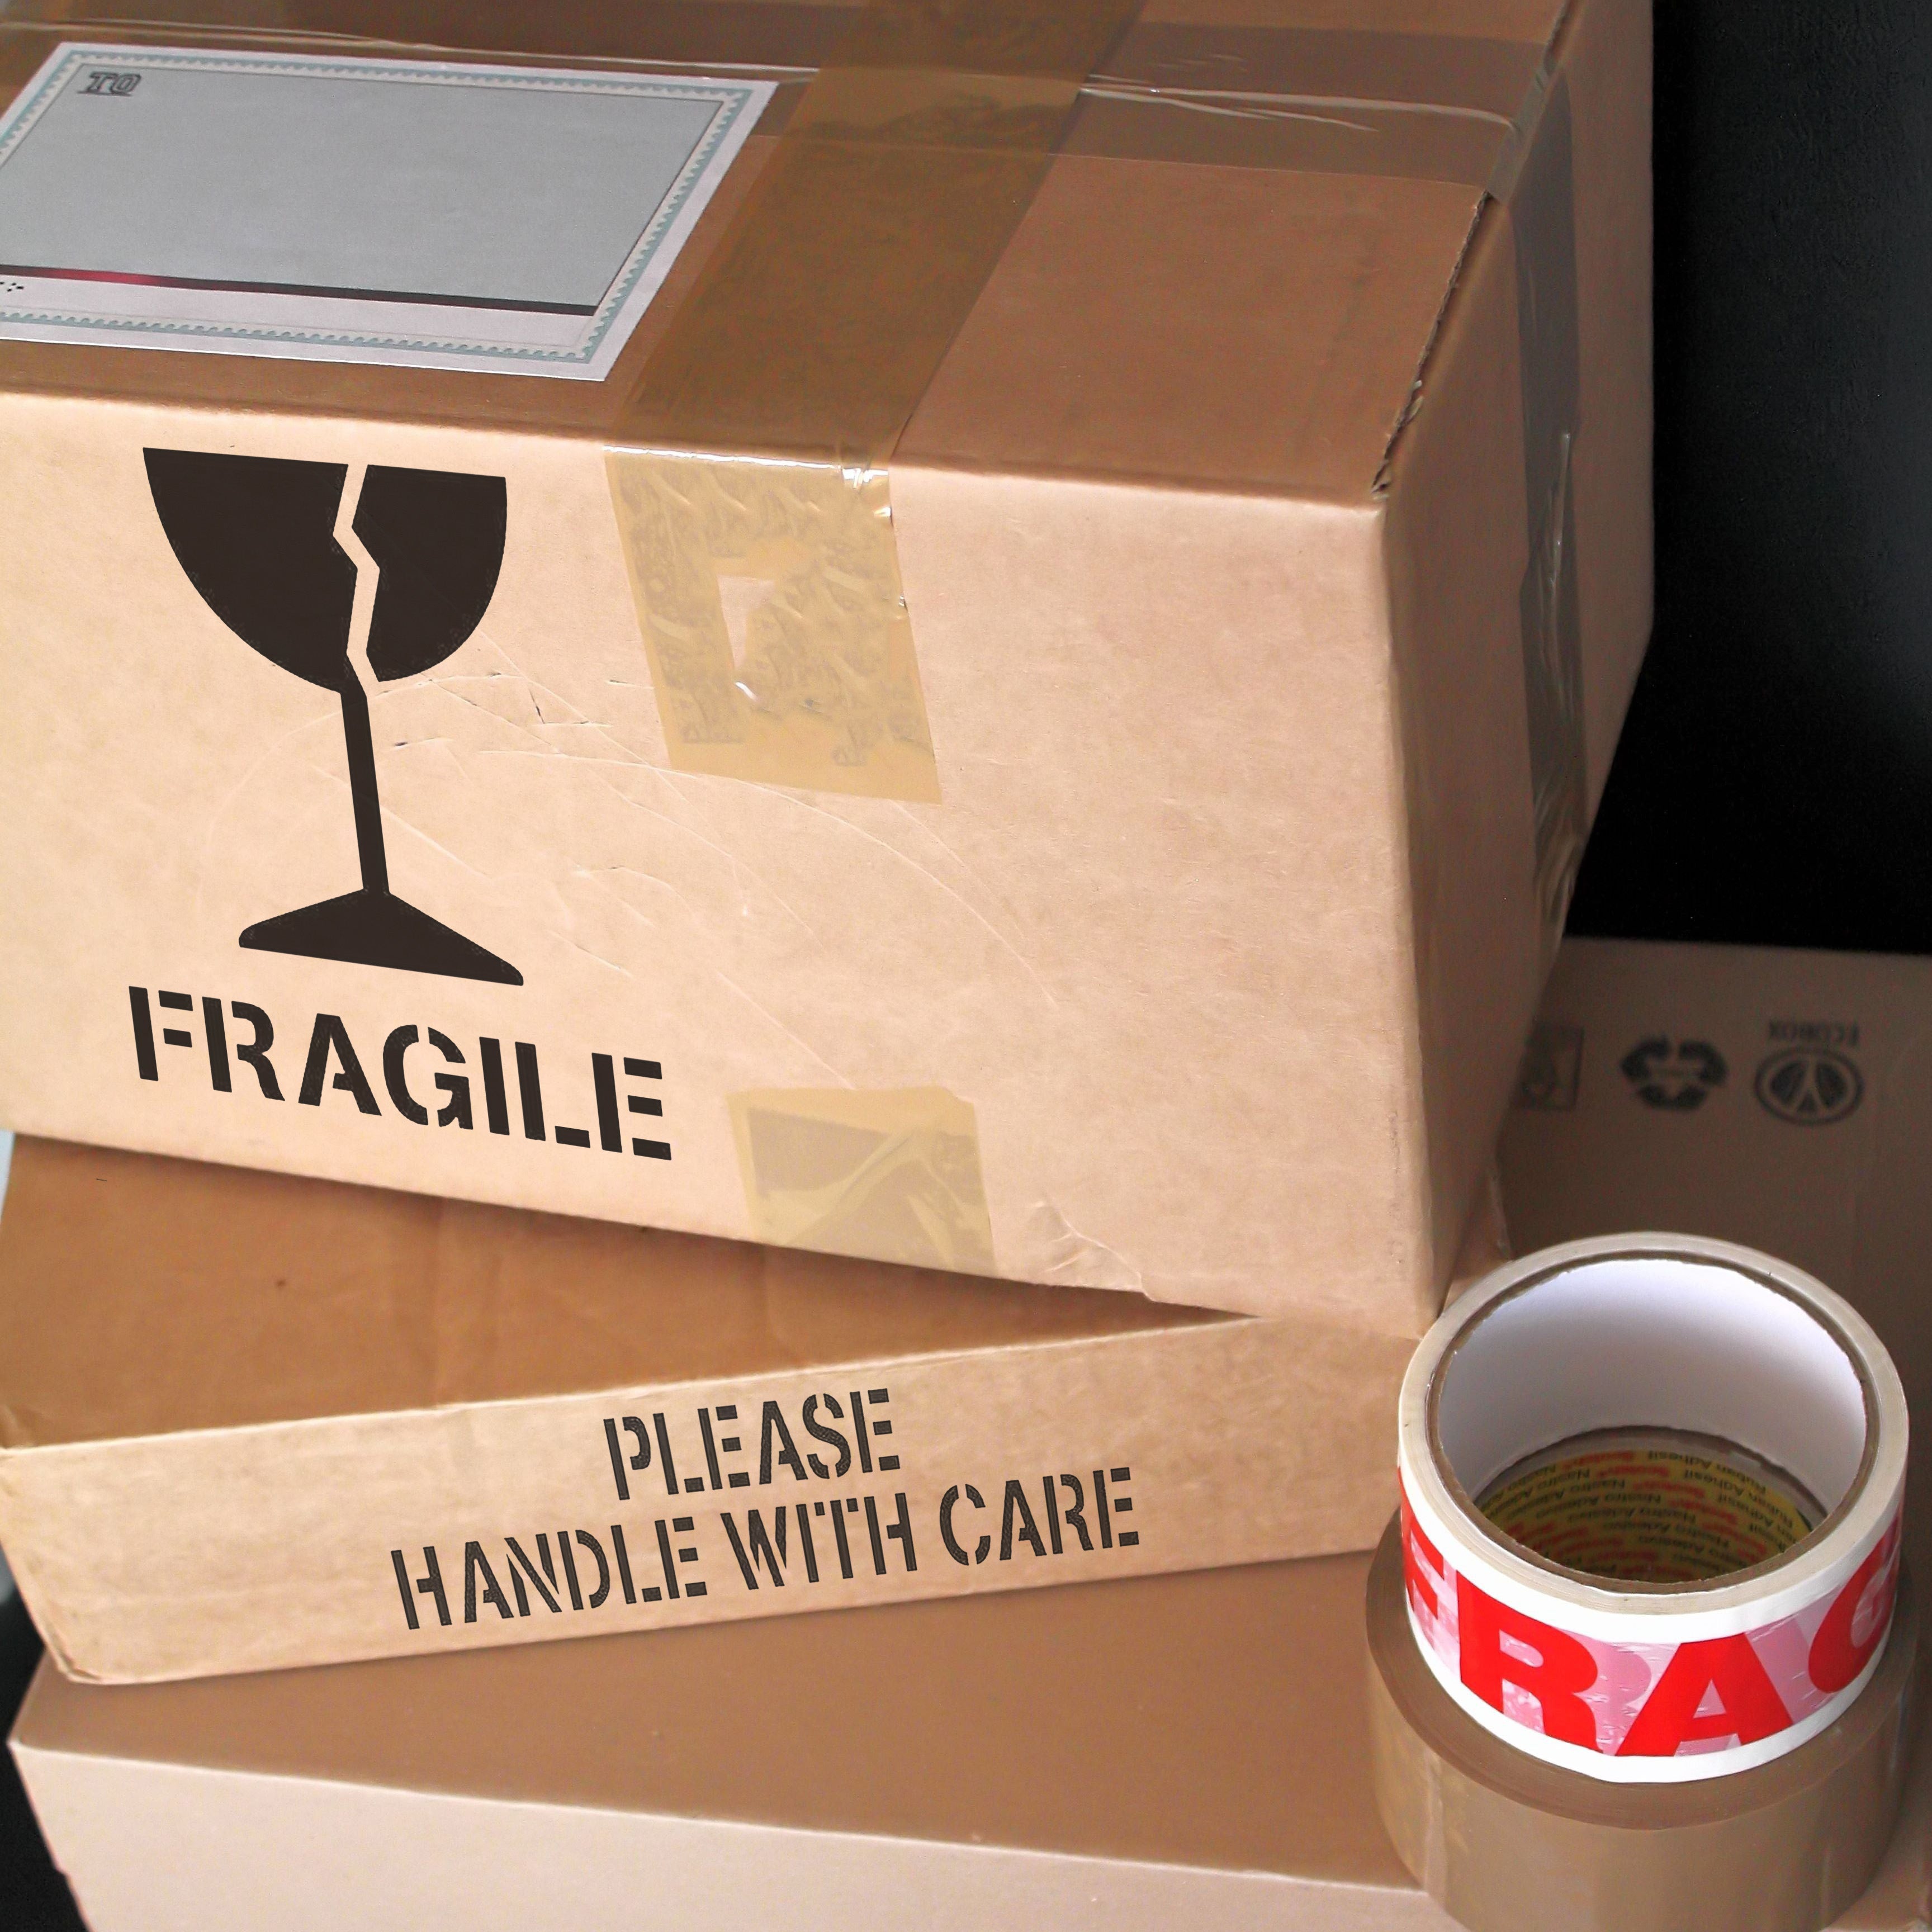 Fragile Freight Marking Stencil - marked shipping boxes.